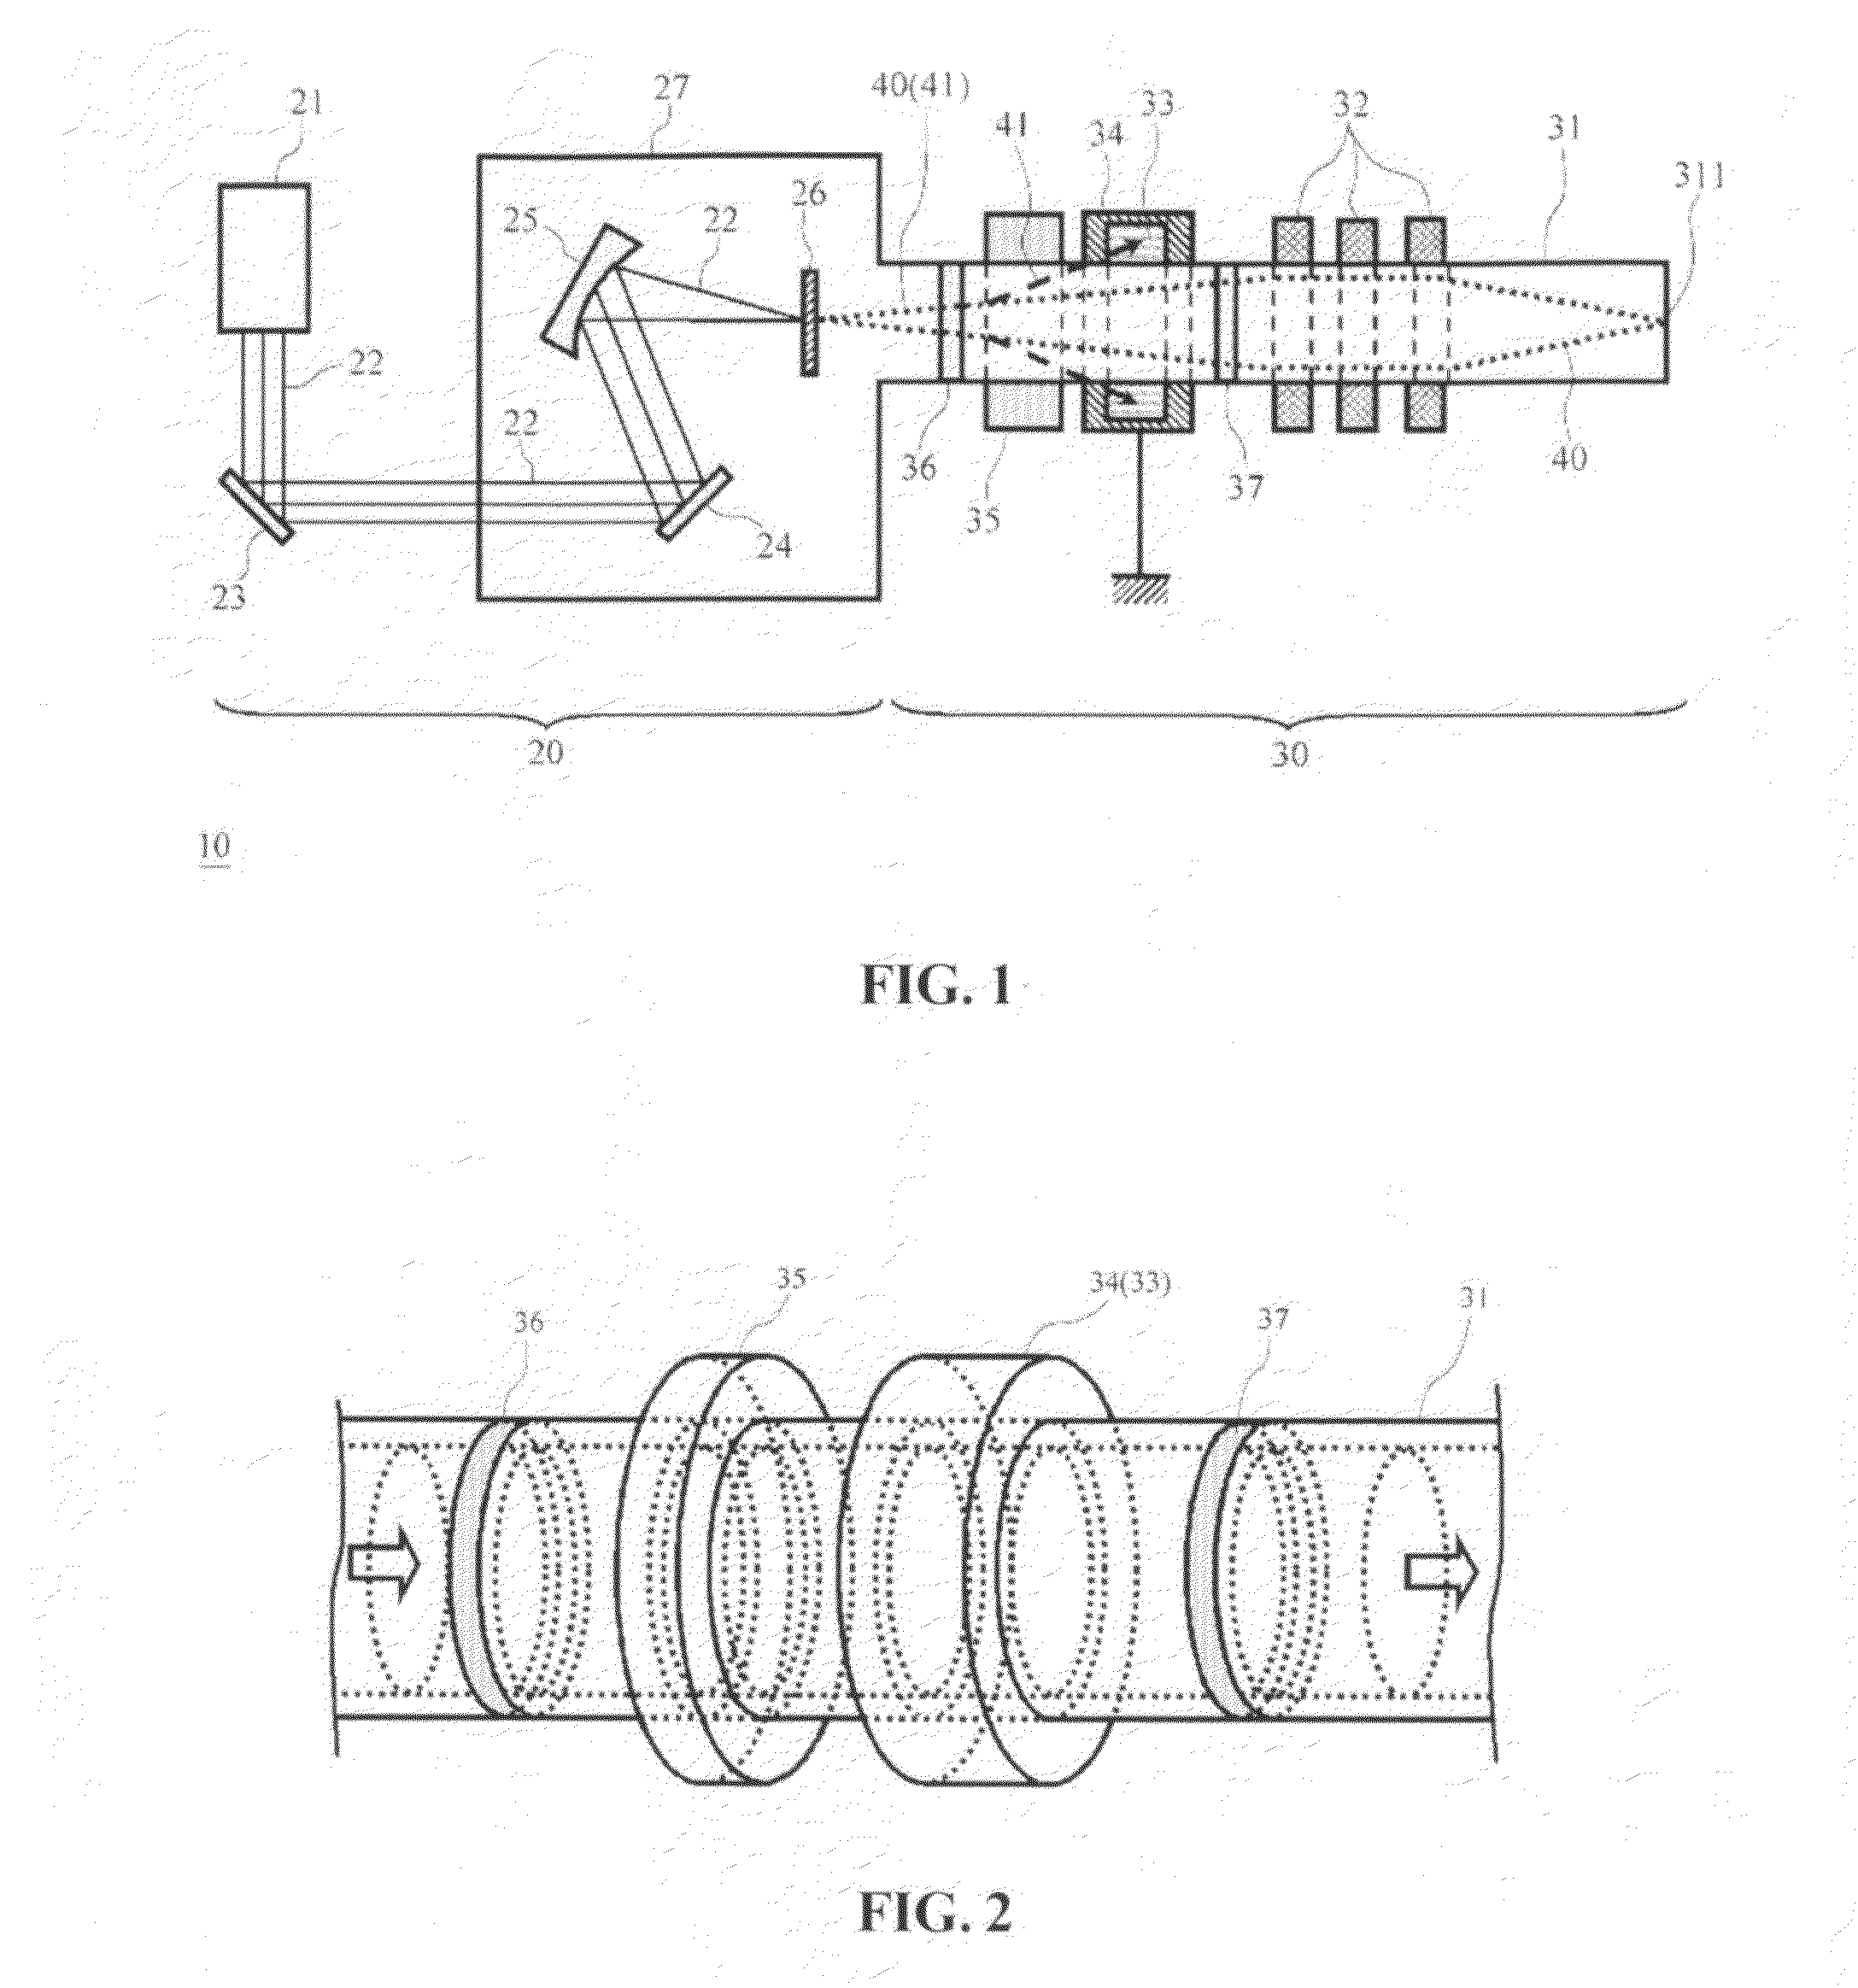 Ion transporter, ion transport method, ion beam irradiator, and medical particle beam irradiator